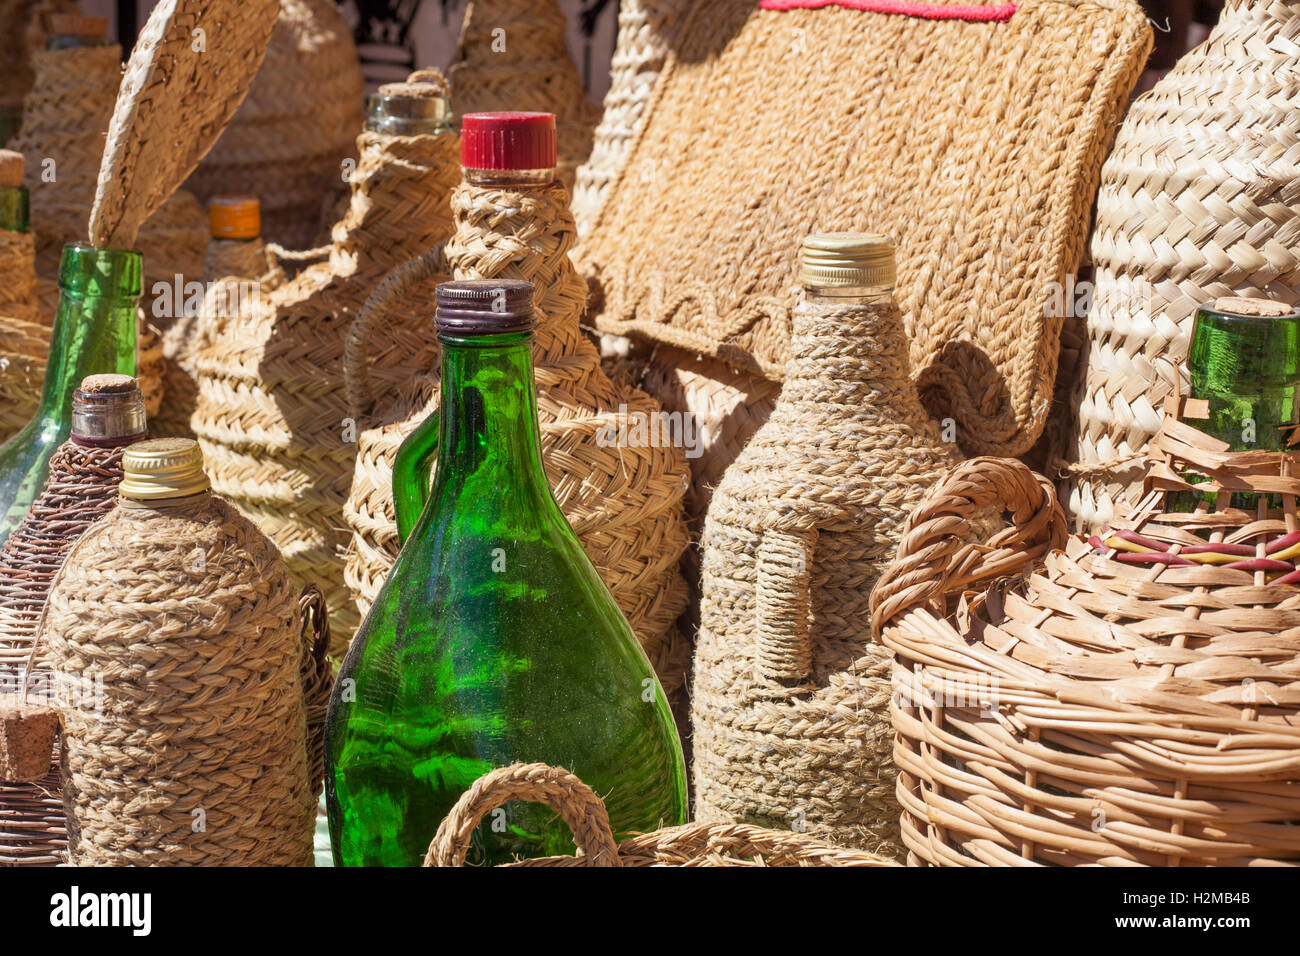 Esparto handcrafts covering recycled glass bottles Stock Photo